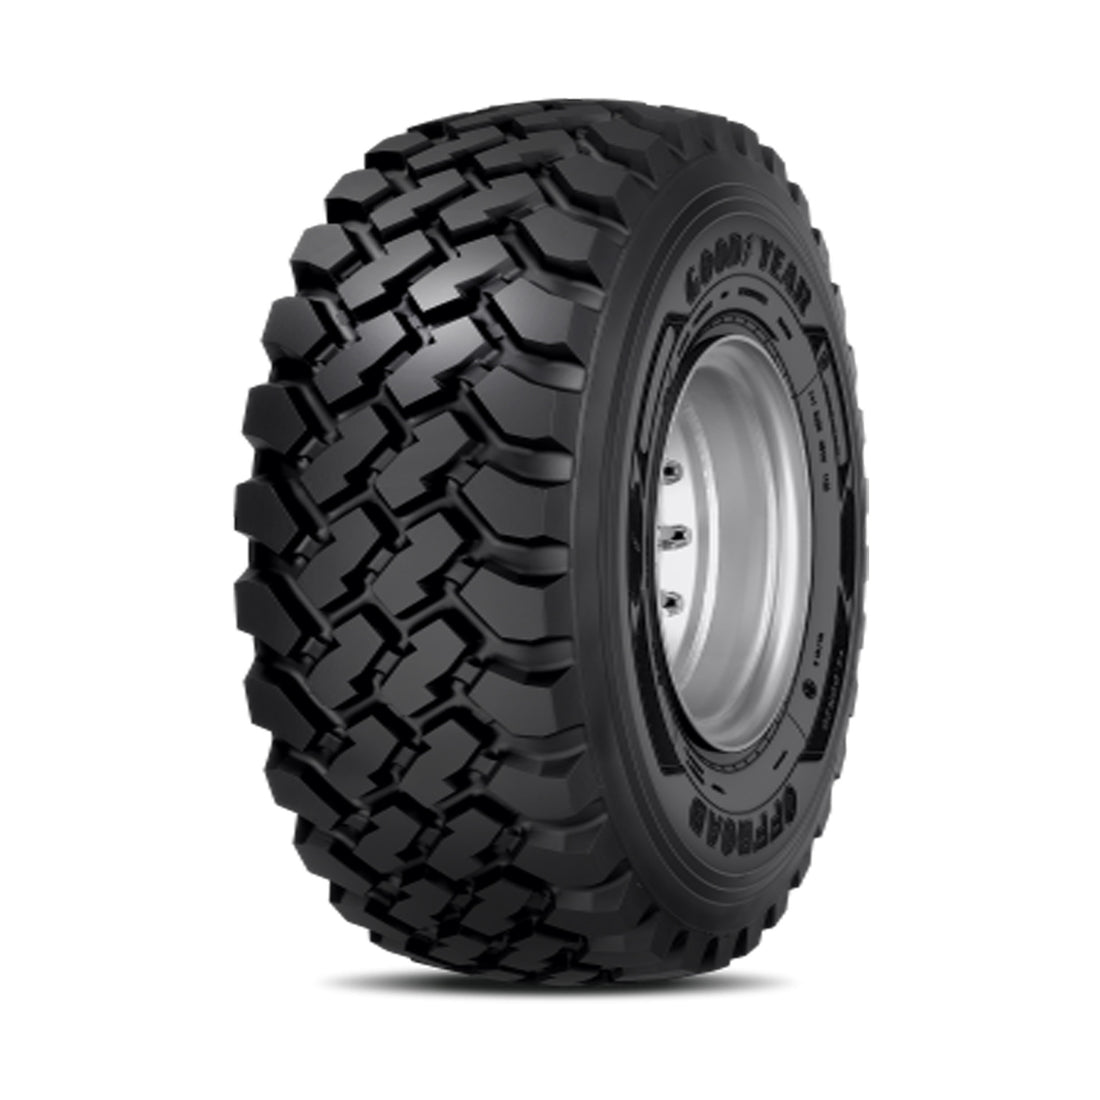 14.00R20 20PR L 164/160J (166/160G) Goodyear OFFROAD ORD TL M+S DOT APPROVED From OTRUSA.COM